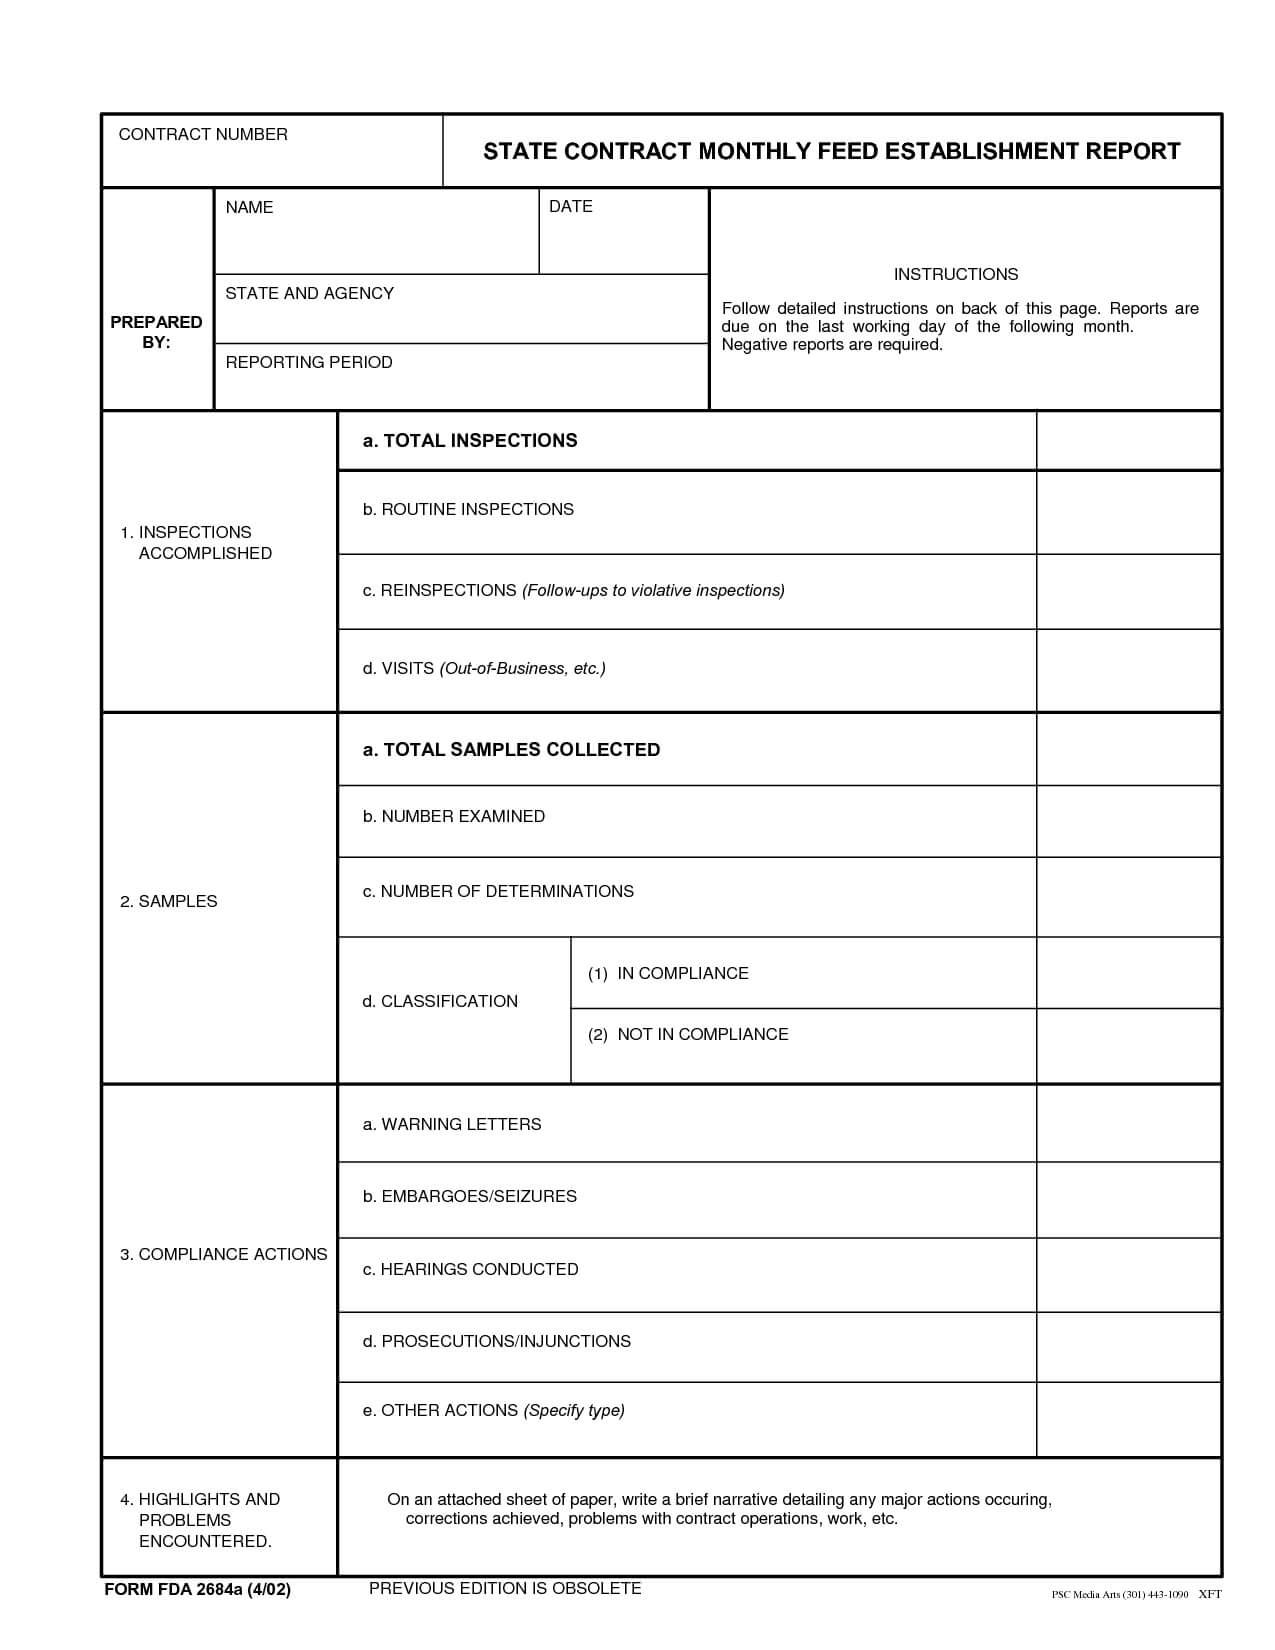 State Report Template ] - Printable Writing Templates Throughout State Report Template